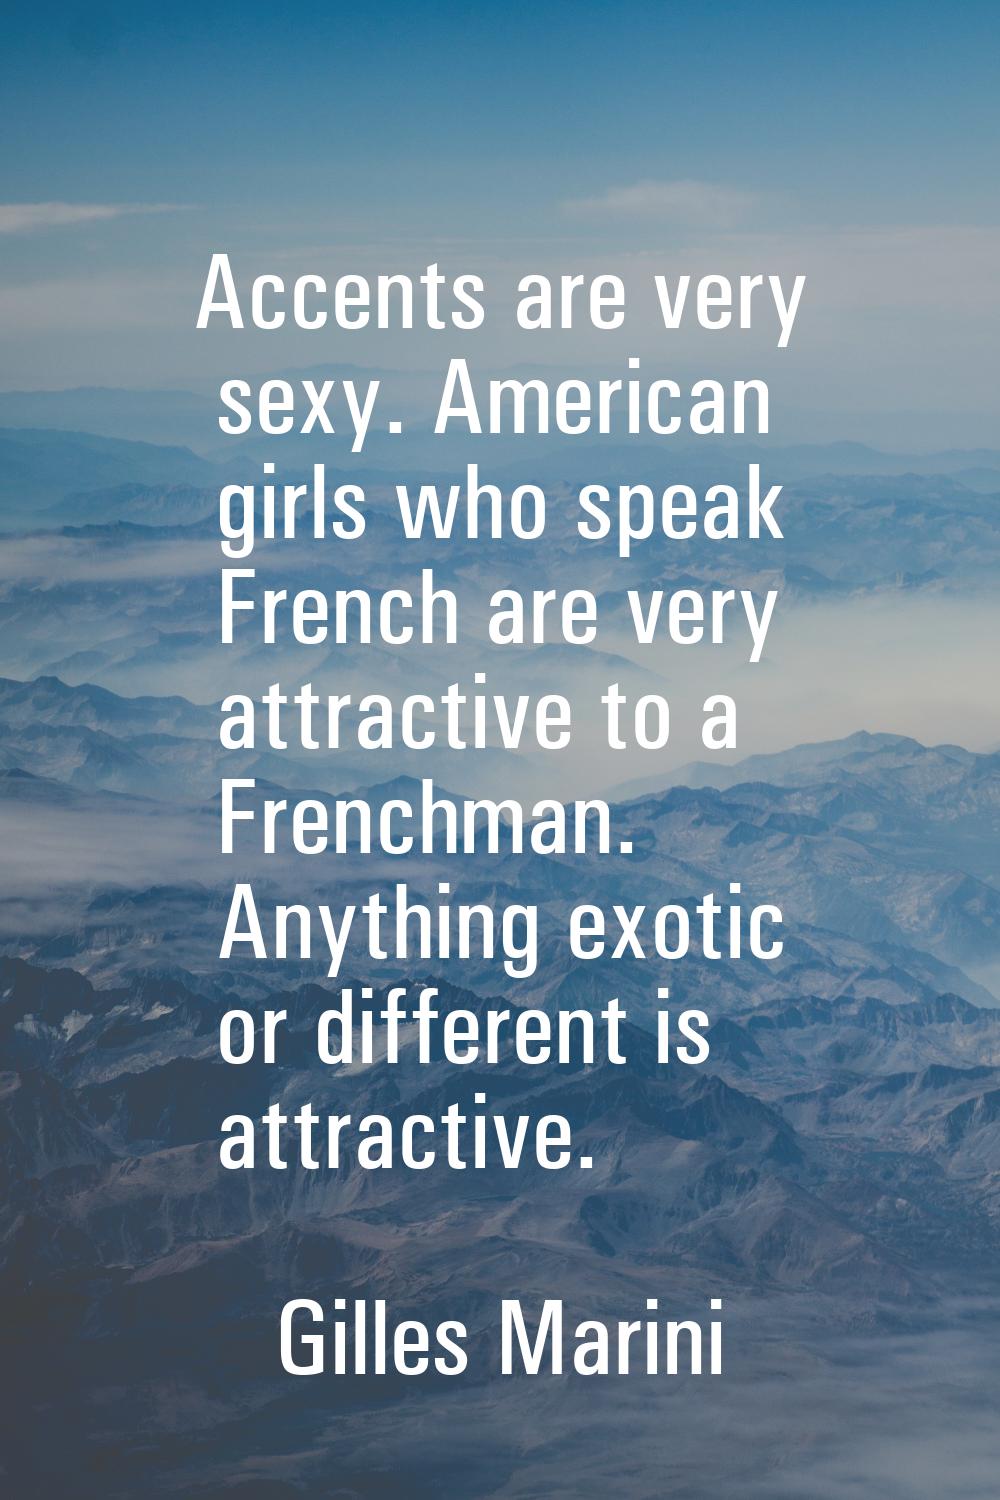 Accents are very sexy. American girls who speak French are very attractive to a Frenchman. Anything